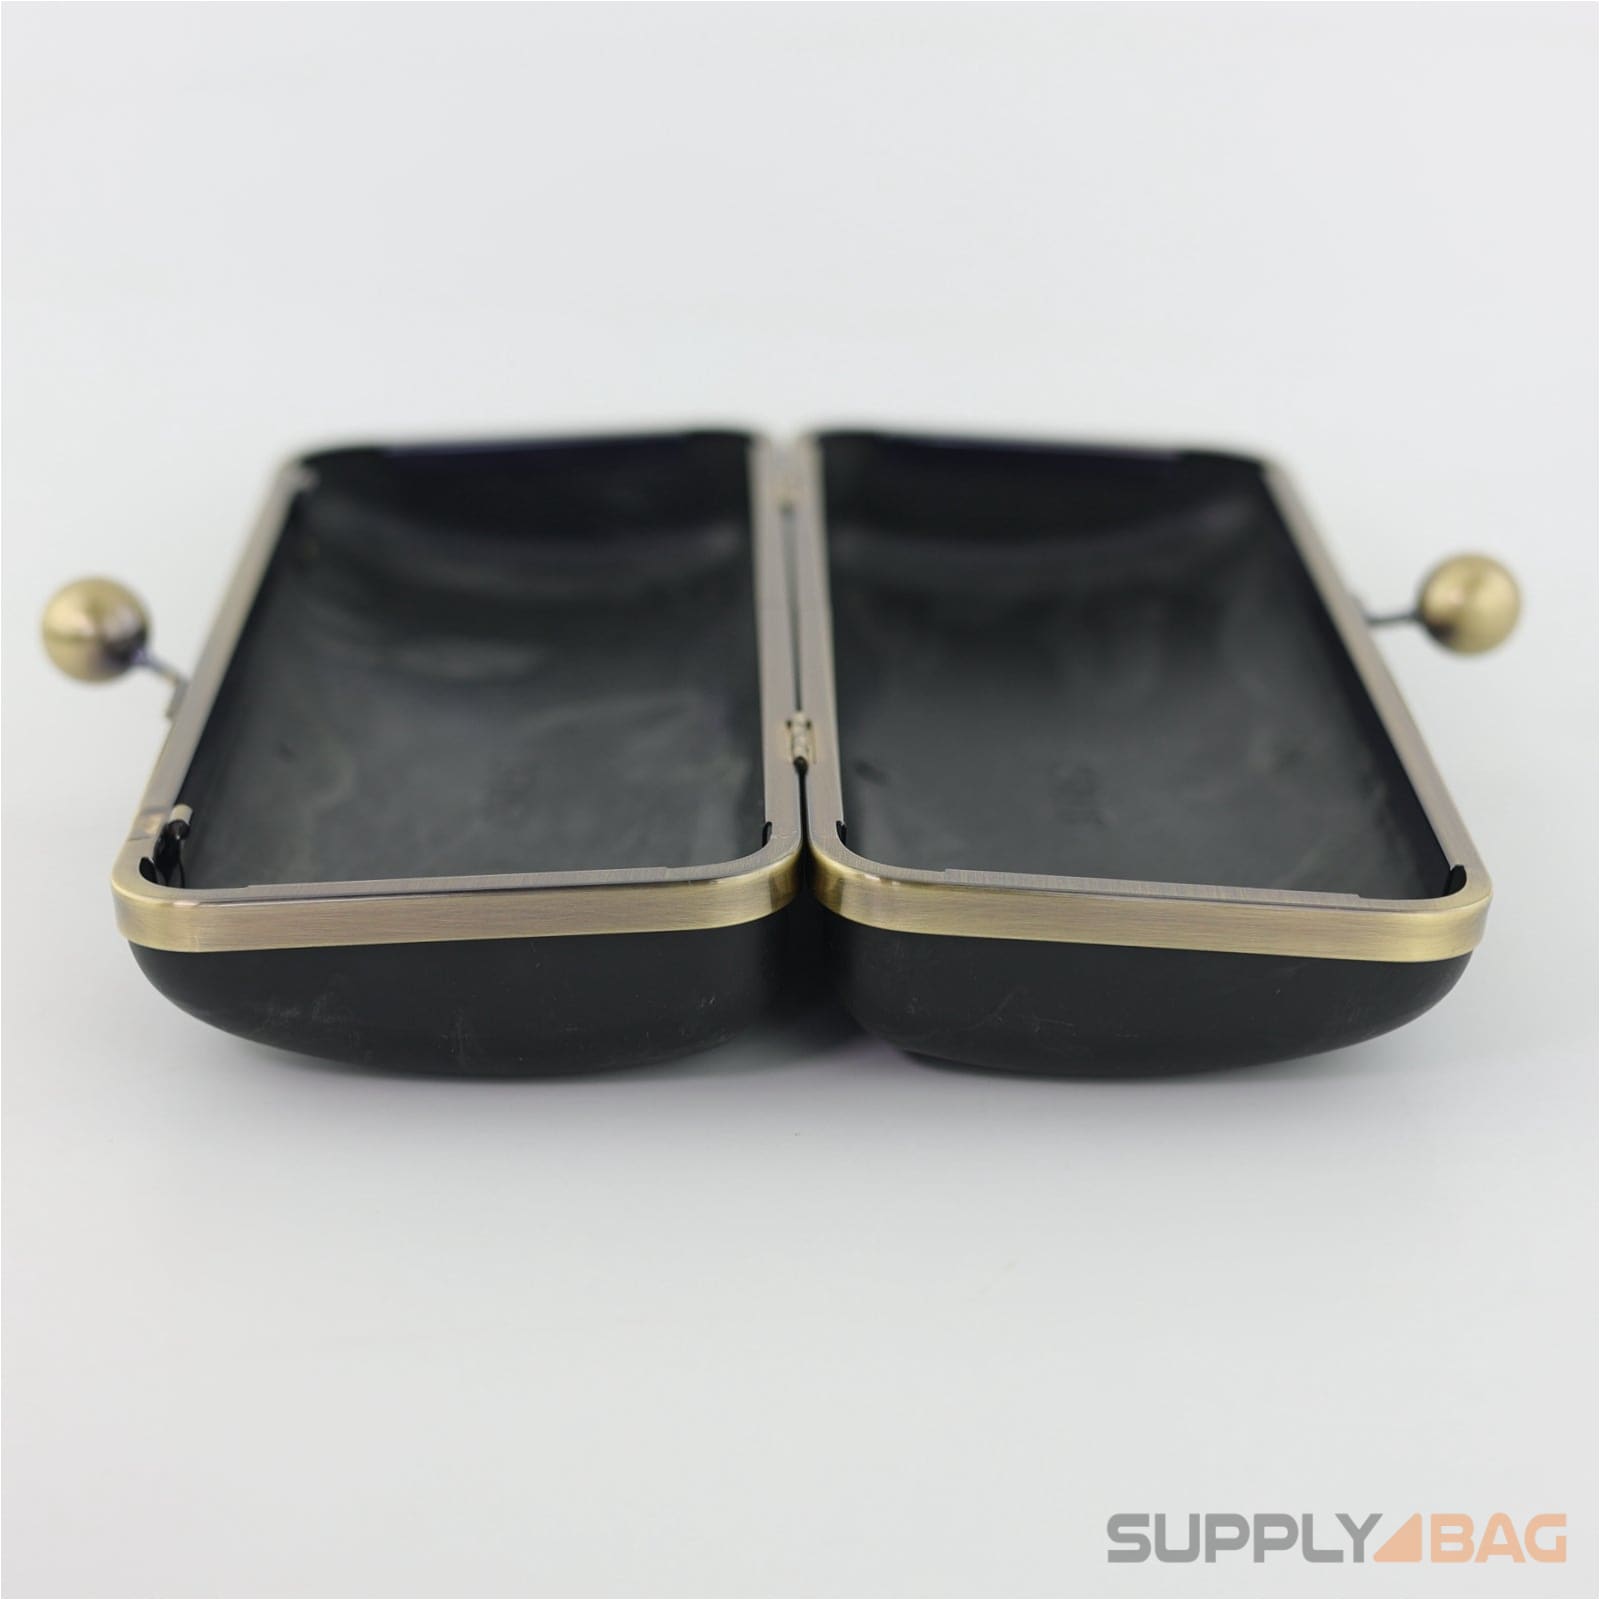 9.5 x 4 inch - Antique Brass Large Clamshell Clutch Frame